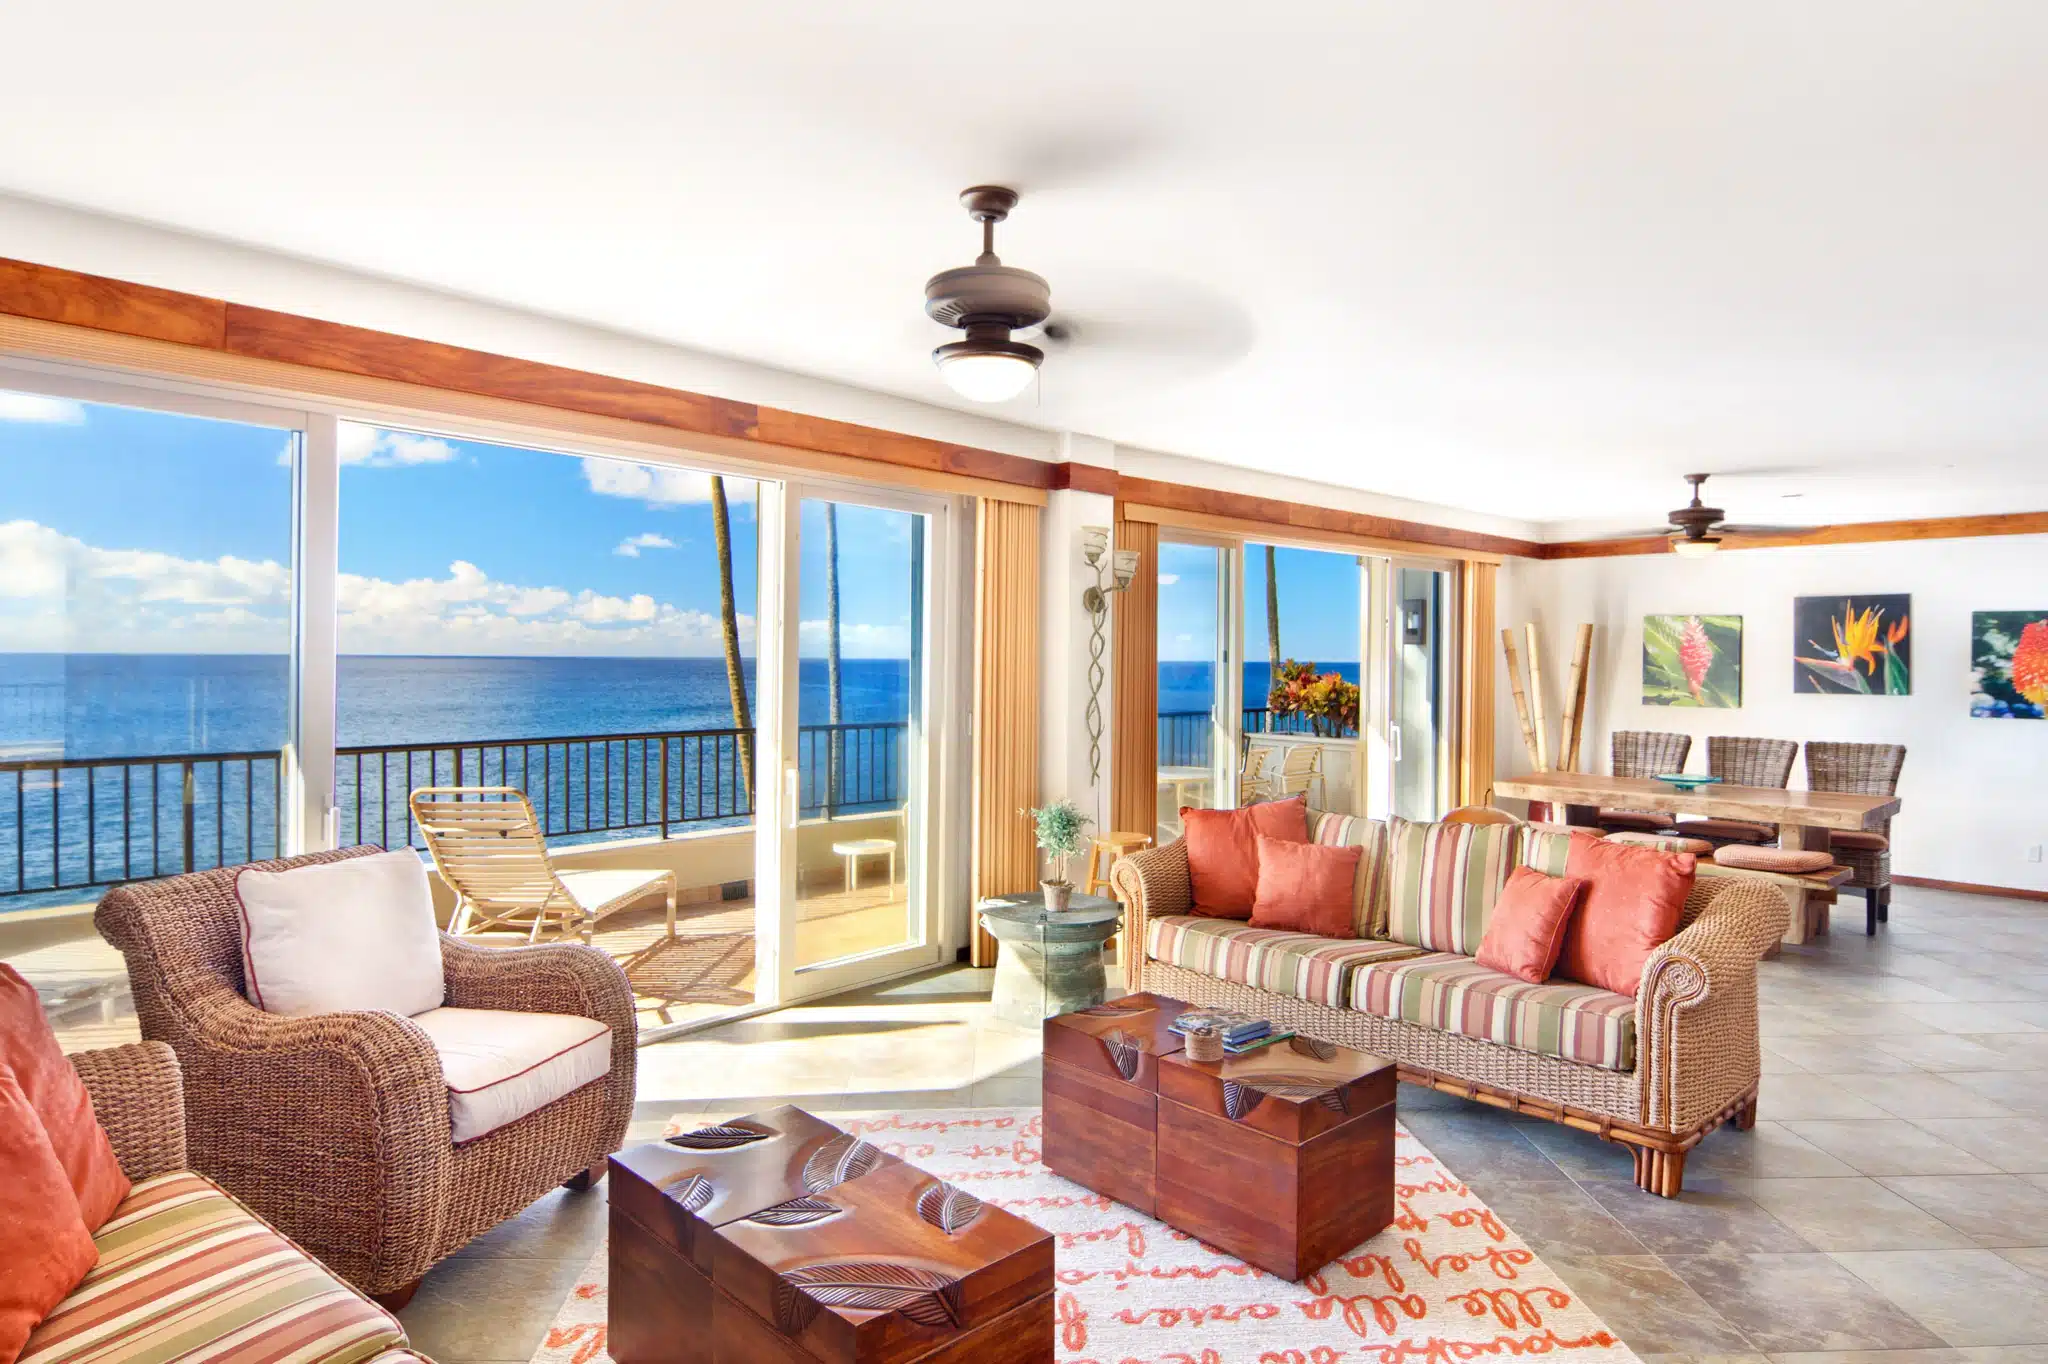 Whalers Cove Oceanfront Resort is a Hotel located in the city of Poipu on Kauai, Hawaii